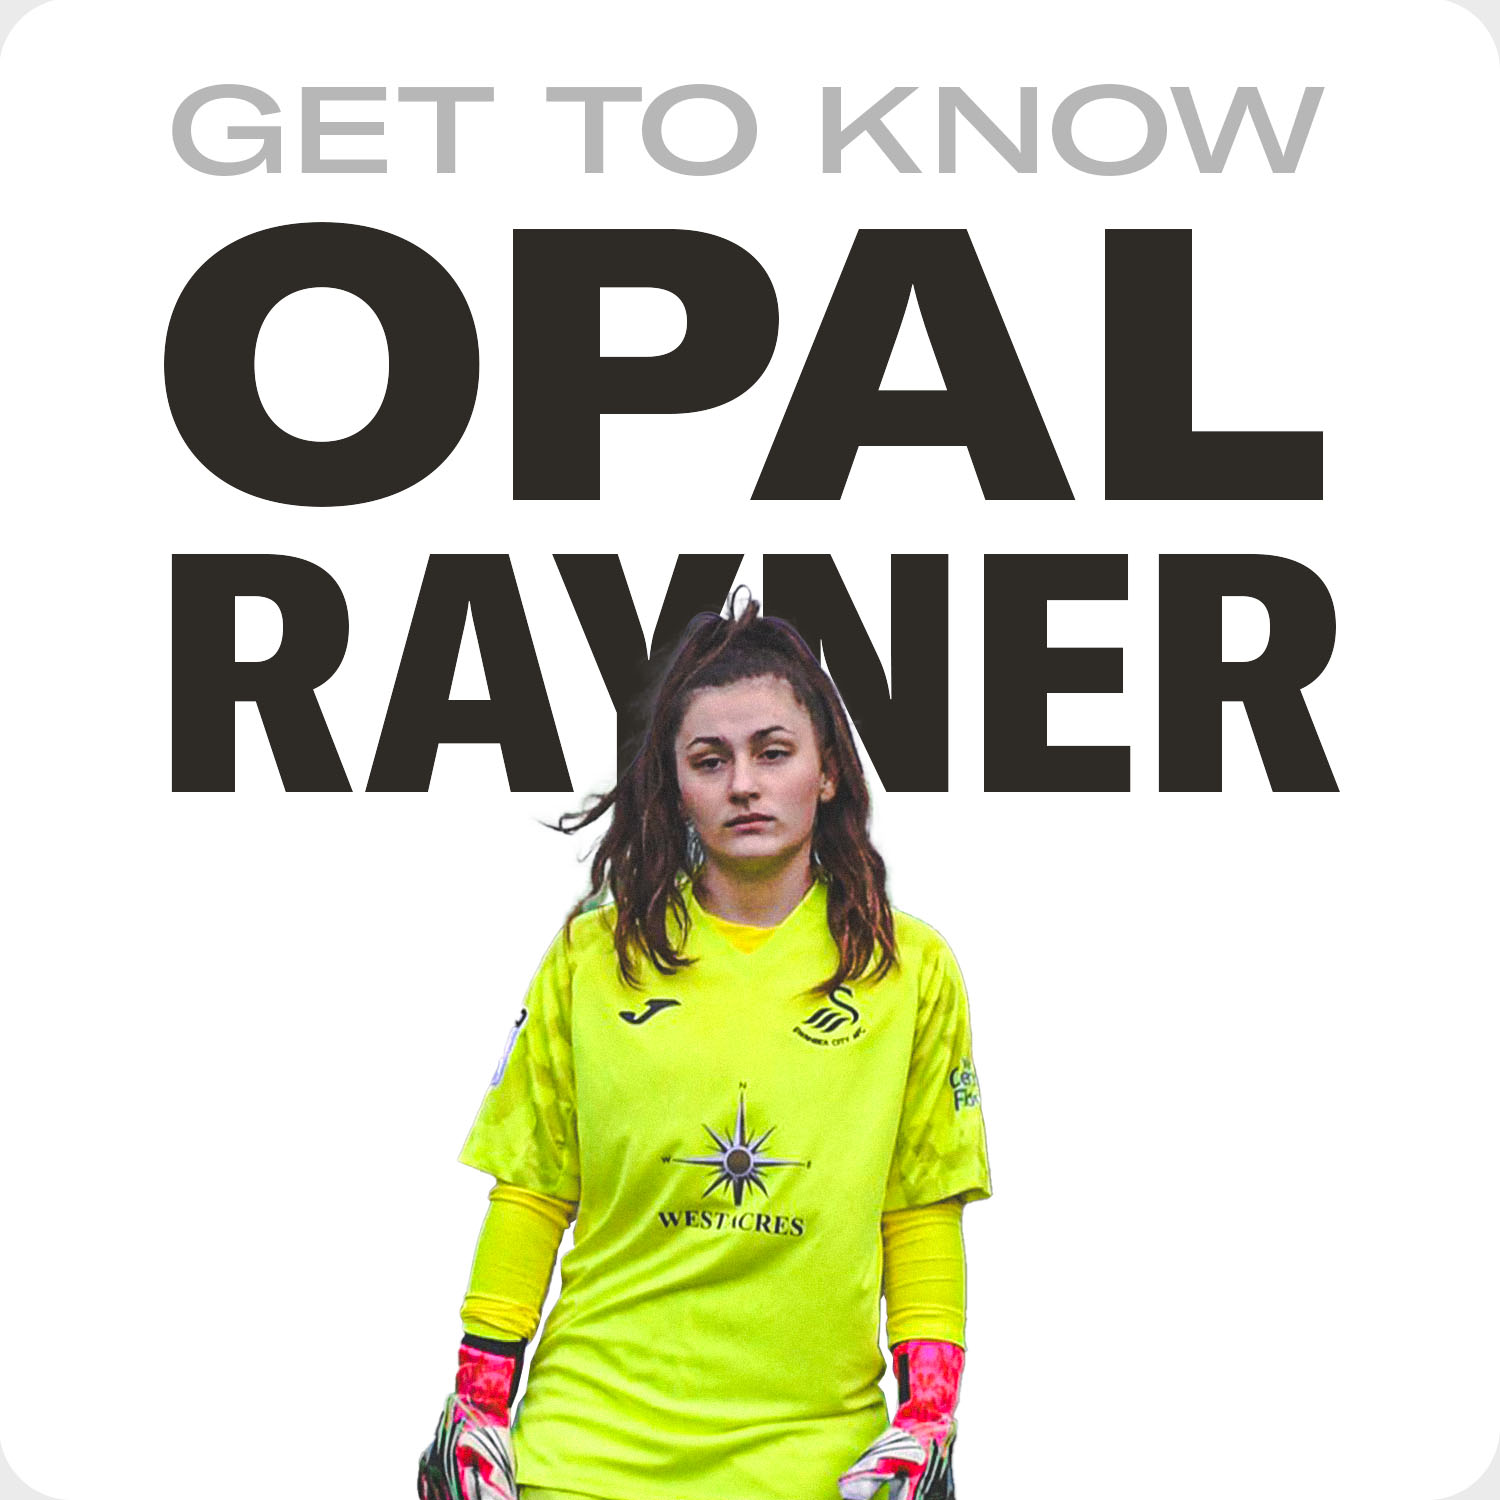 Get to Know: Opal Rayner